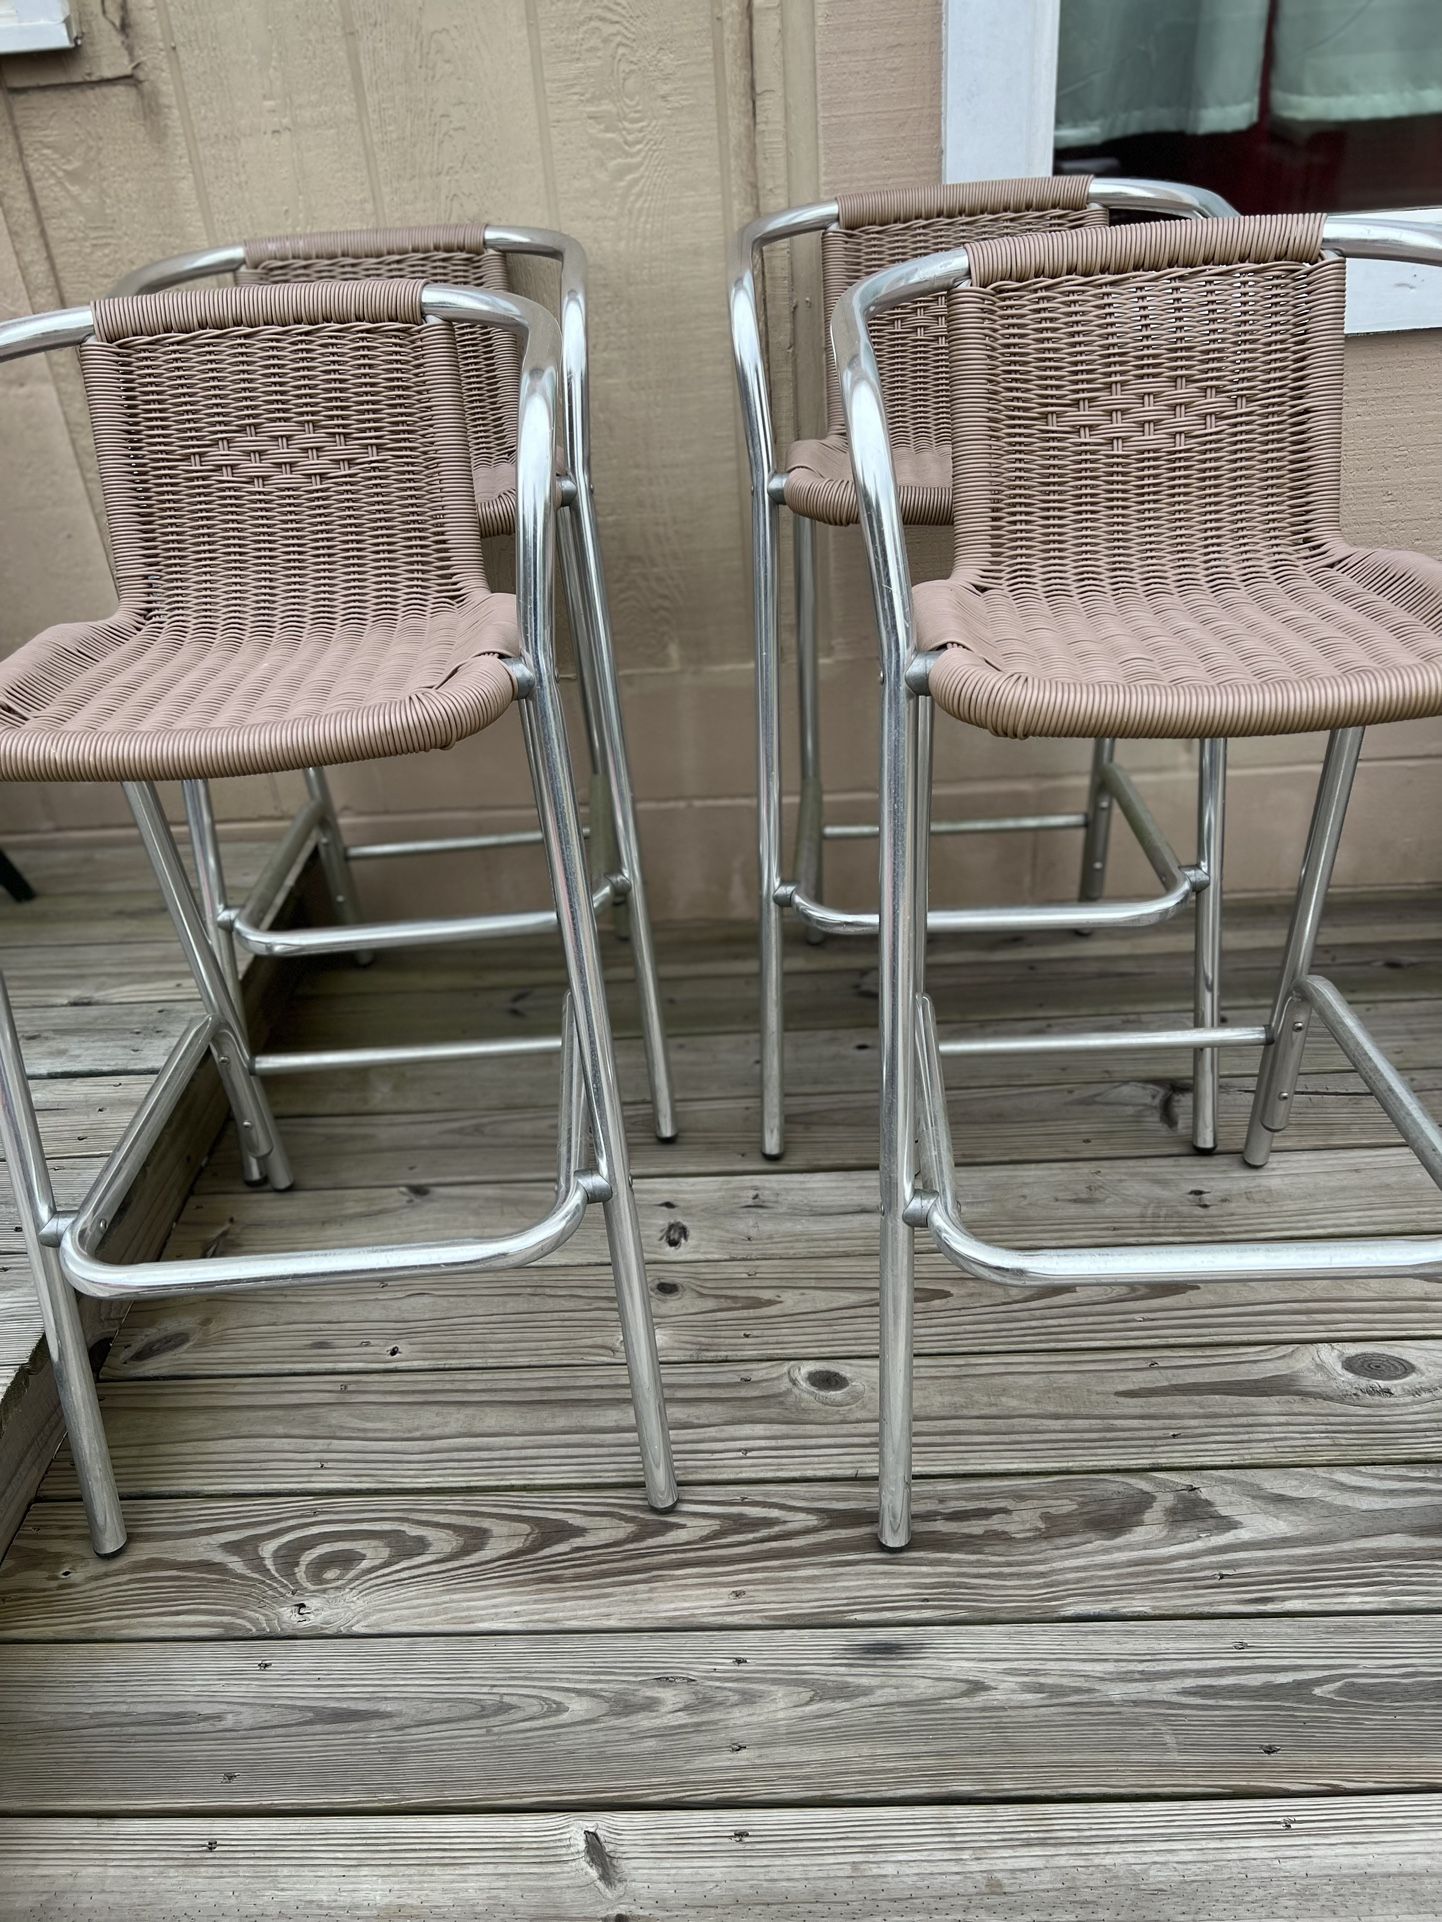 Barstools. Set of 4. Aluminum/vinyl wicker style. Stools sets 30 from floor. Very good condition. 